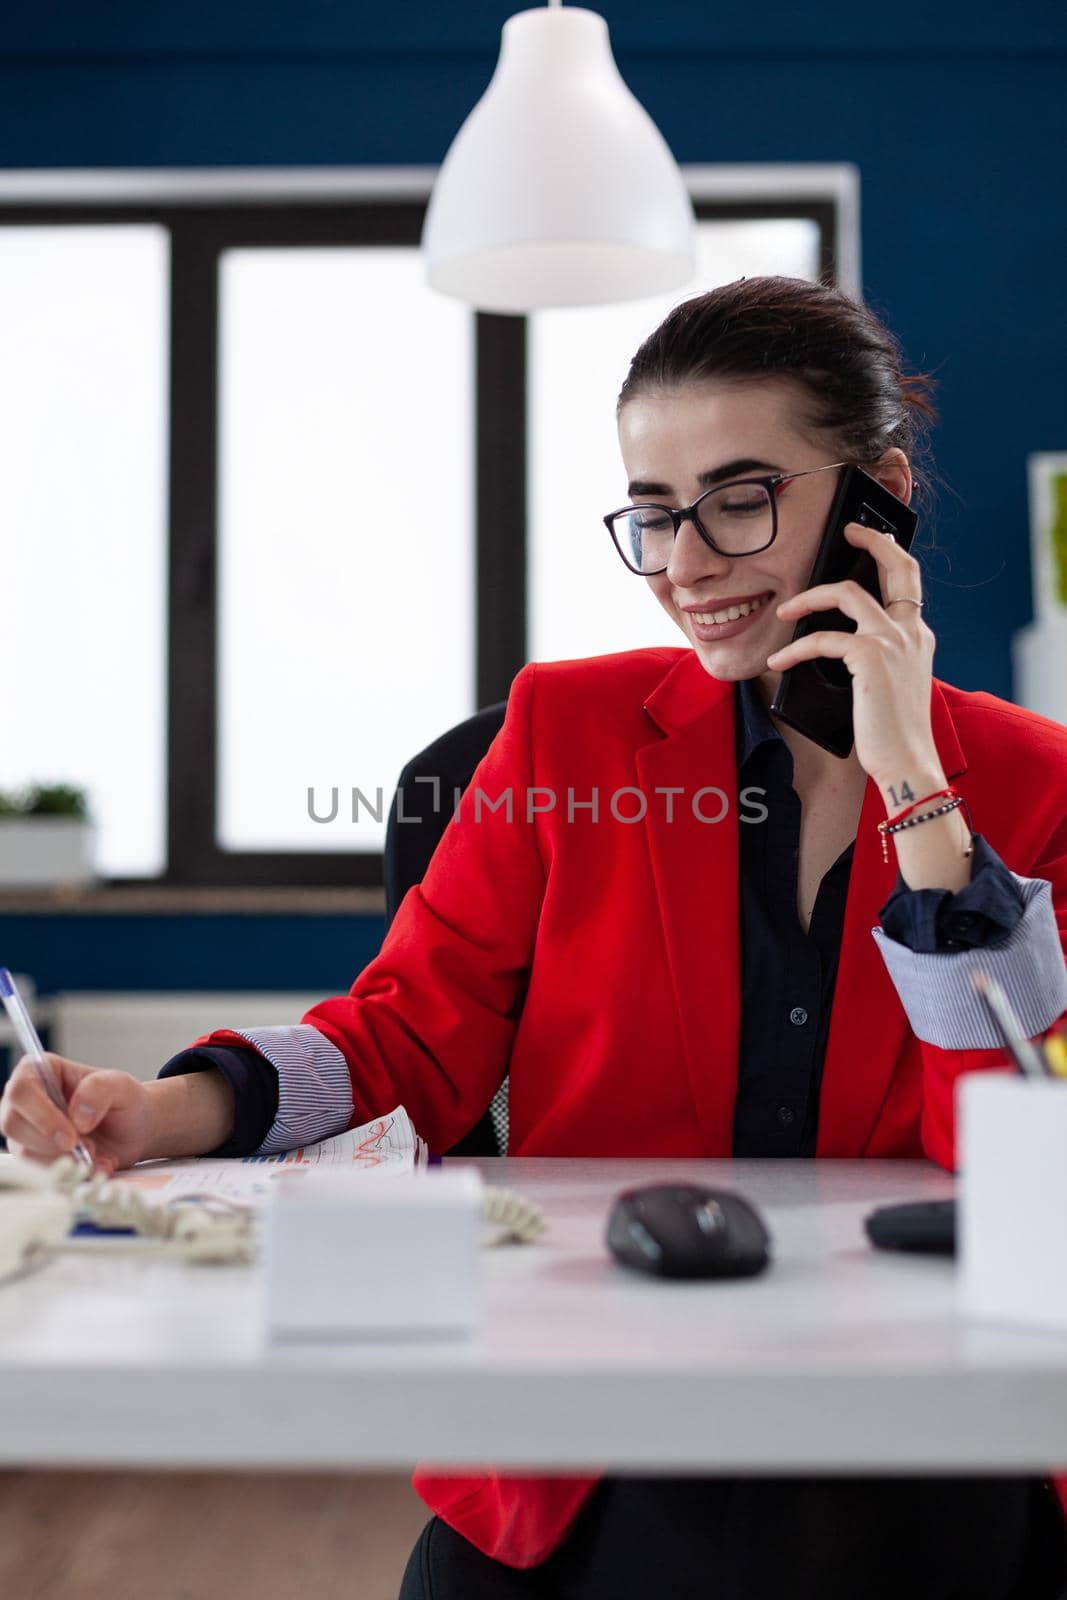 Financial adviser discussing with client during phone call conversation, looking at official documents. Company manager answering executive questions during mobile call sitting at desk in workplace .